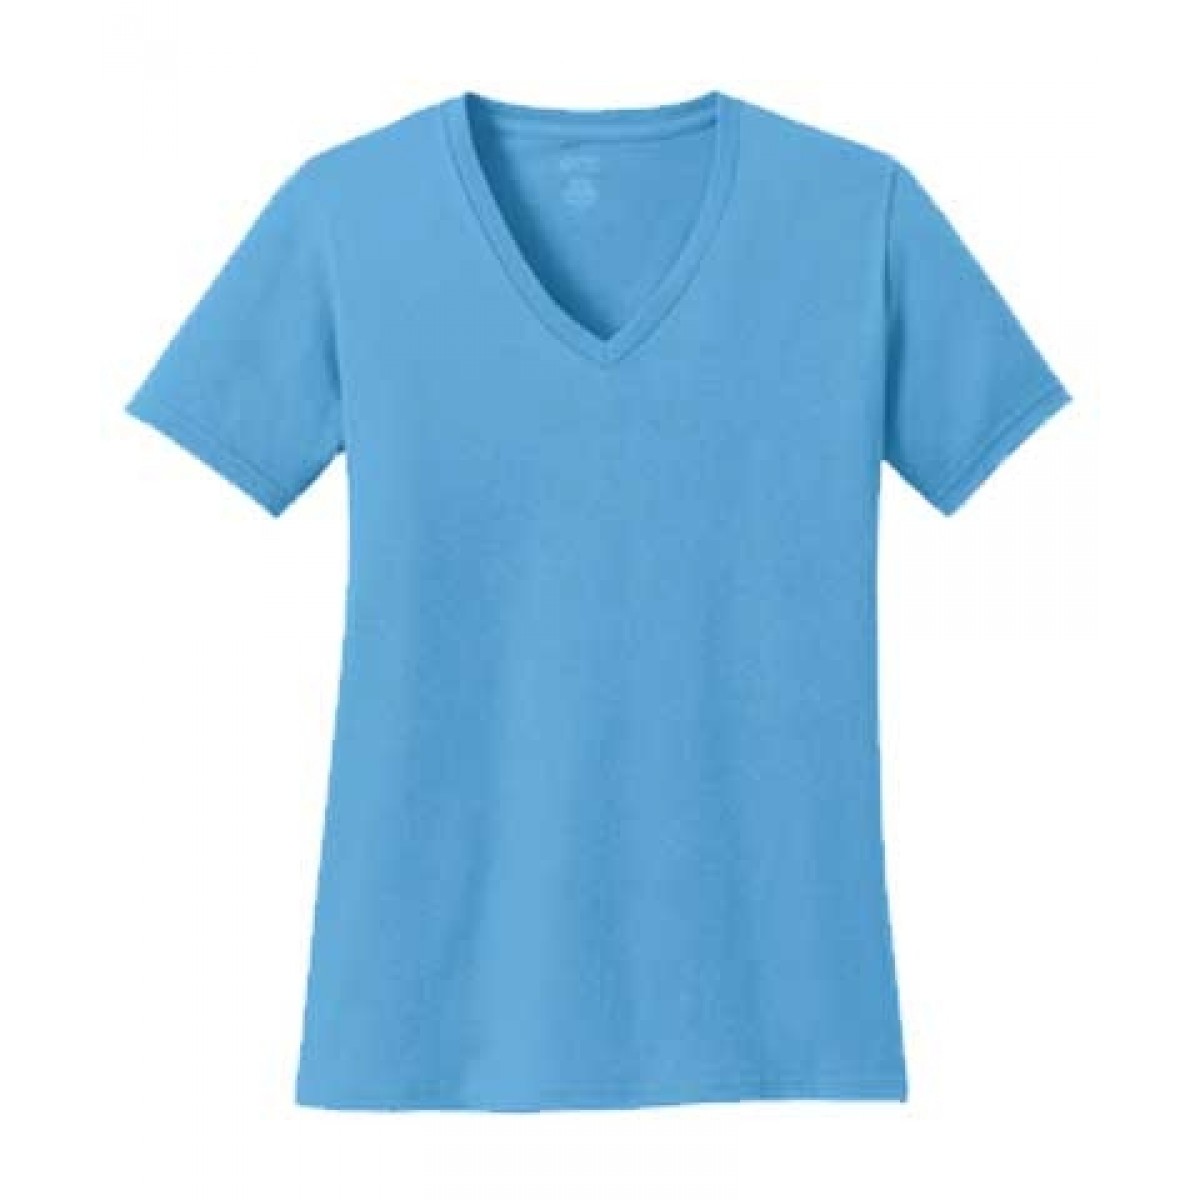 Ladies V-Neck Tee - Click for More Colors-Sky Blue-L